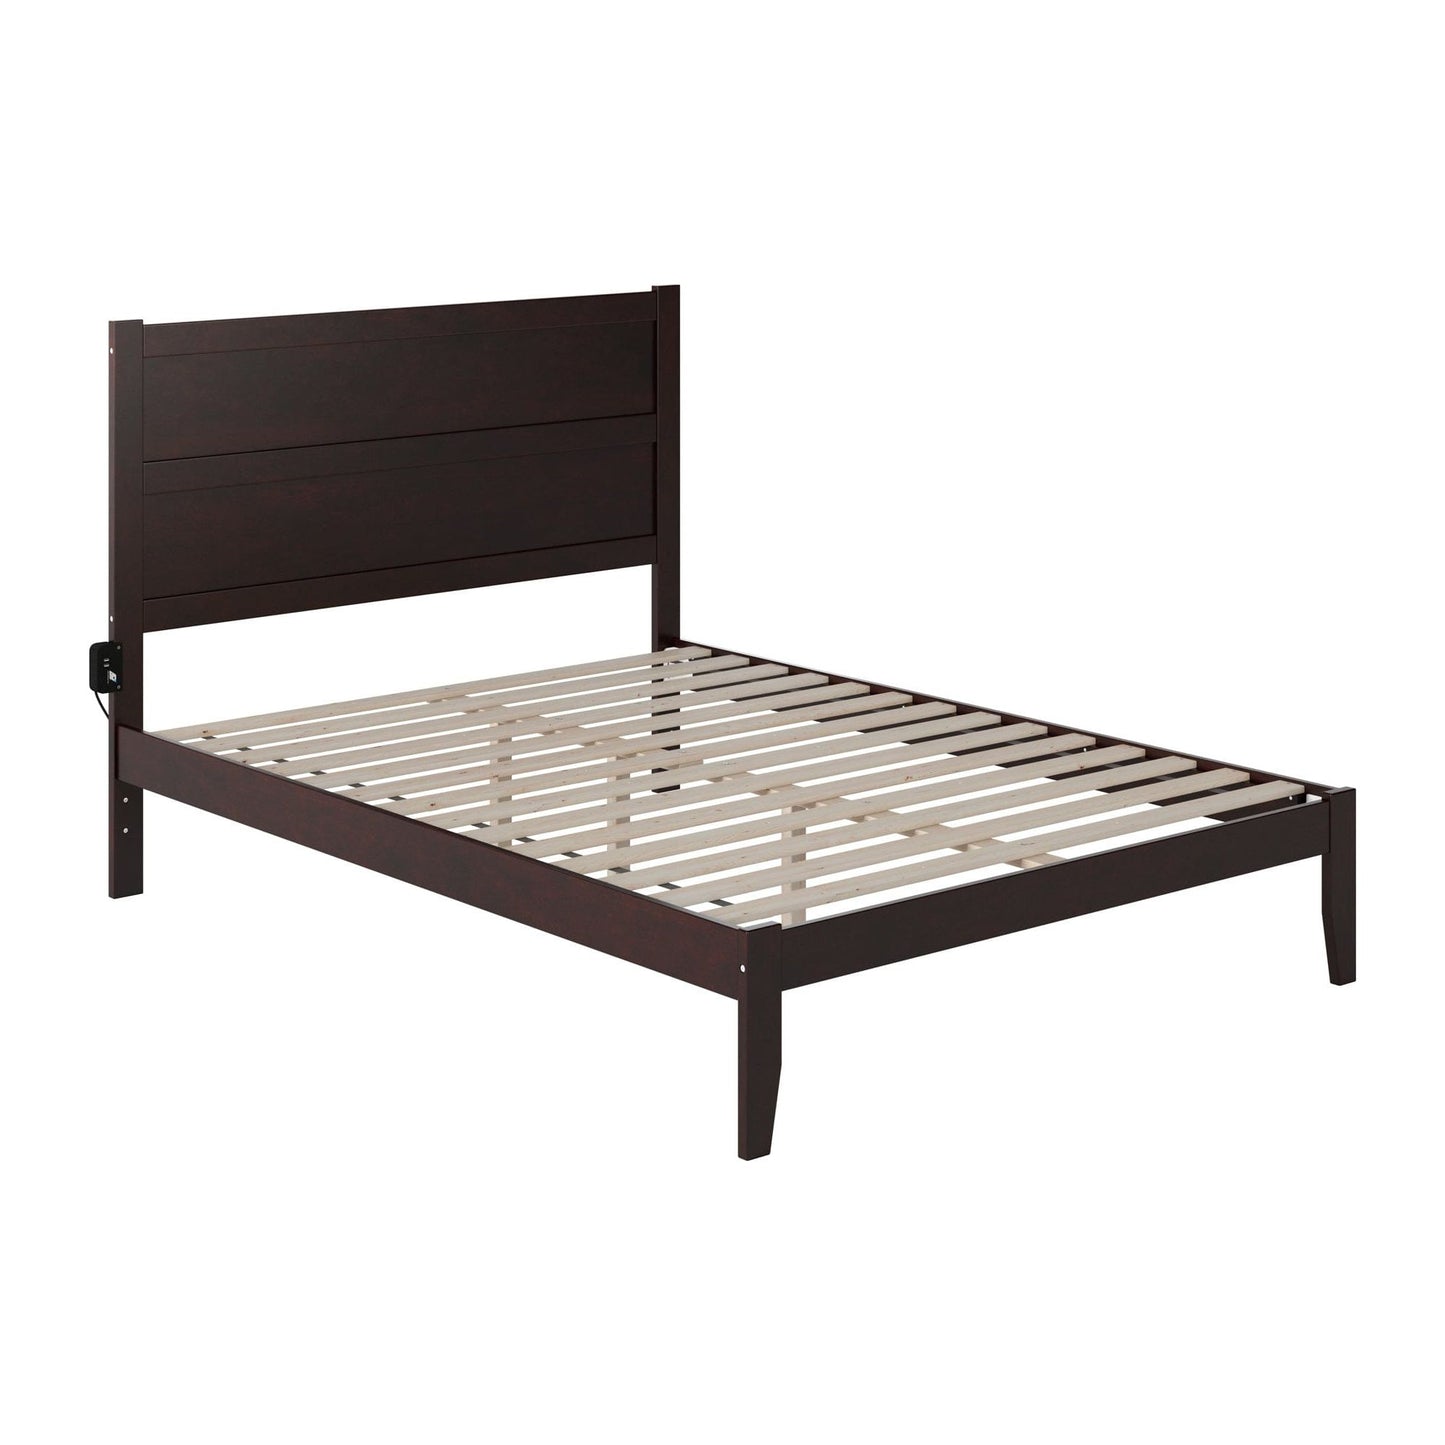 AFI Furnishings NoHo Queen Bed in Espresso AG9110041